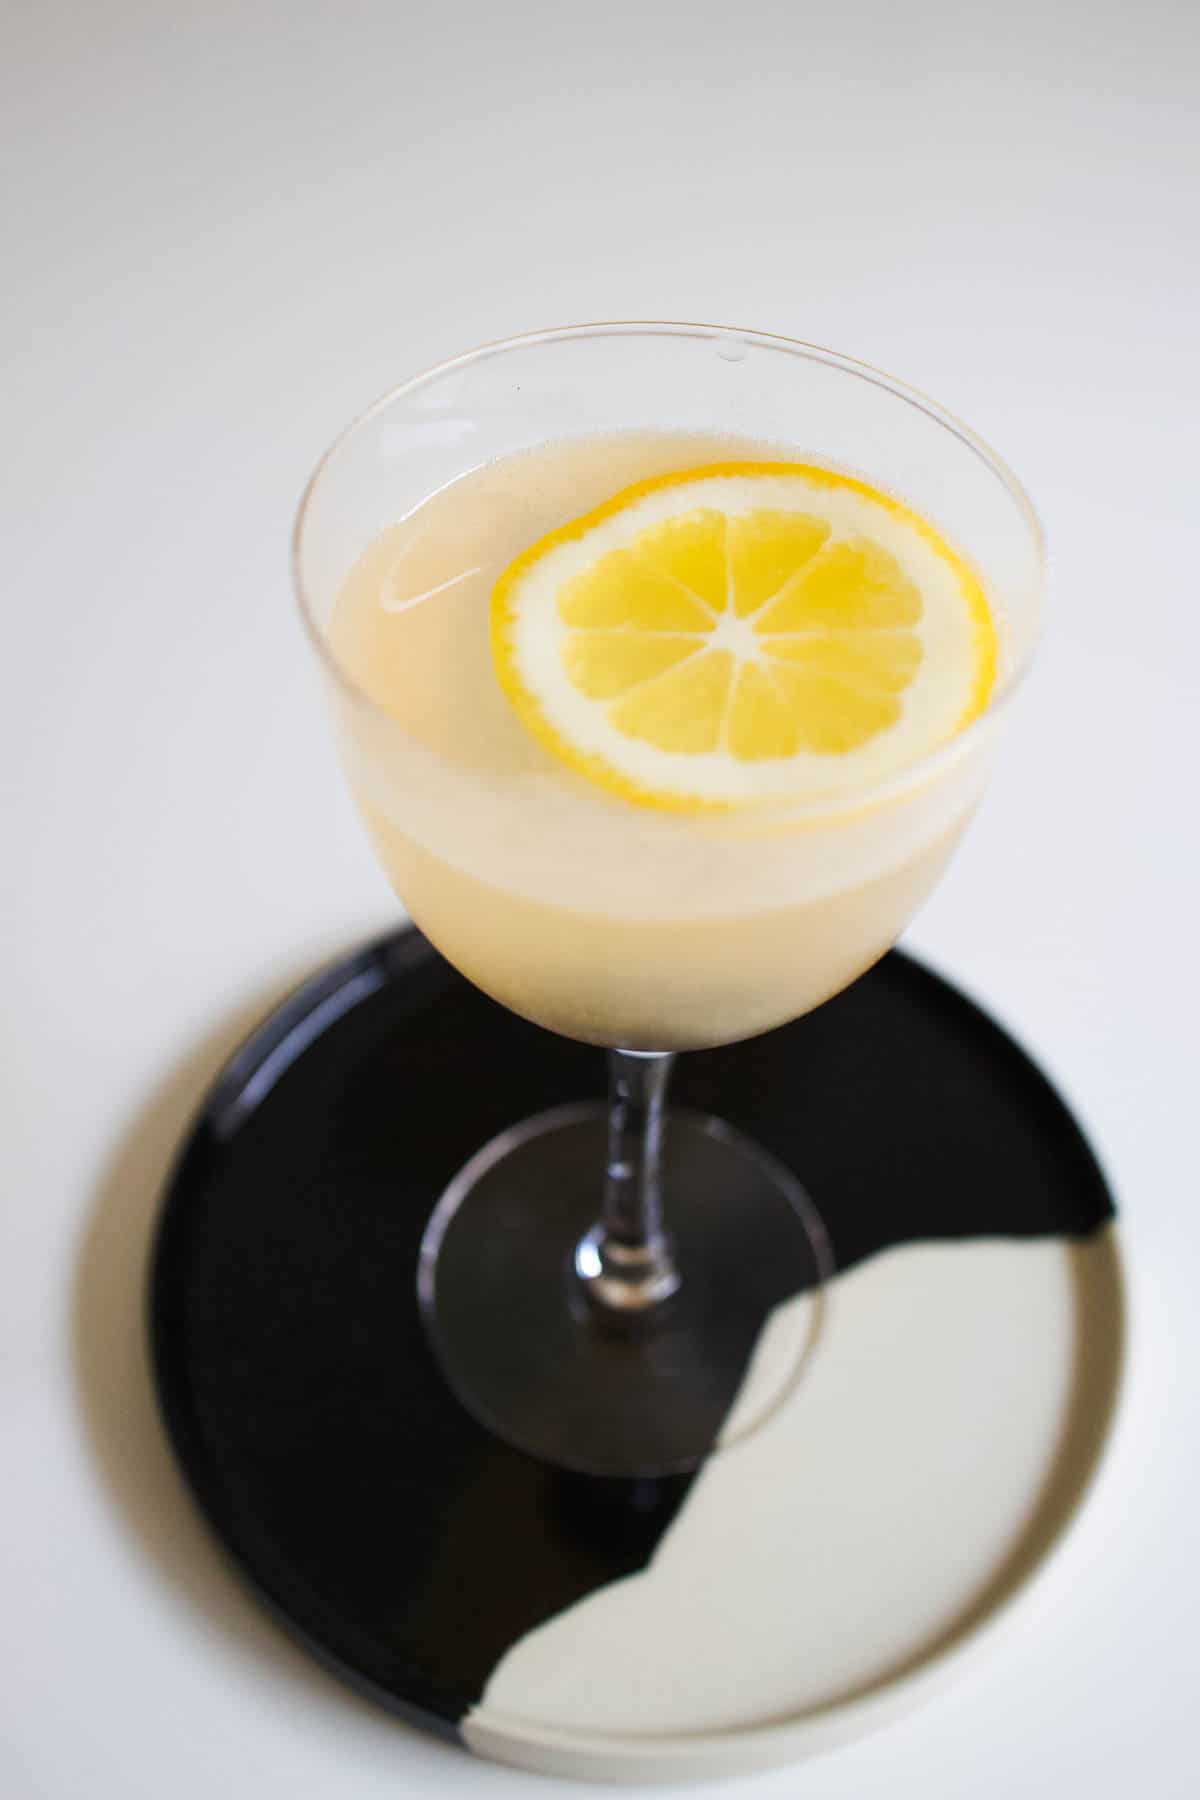 Cocktail on a black and white tray garnished with a lemon wheel.